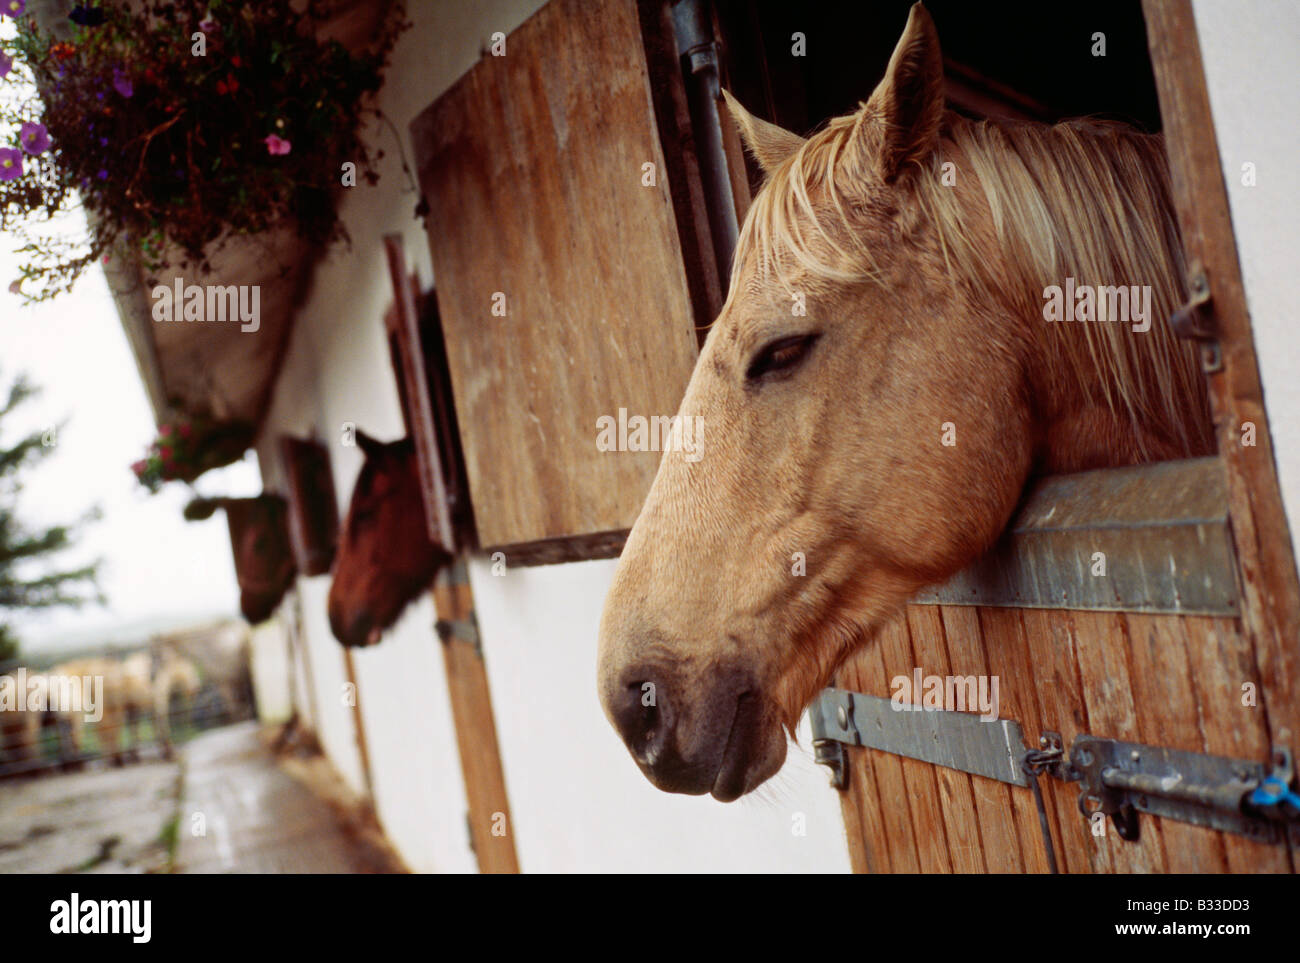 Horses peers out of its stable. Stock Photo